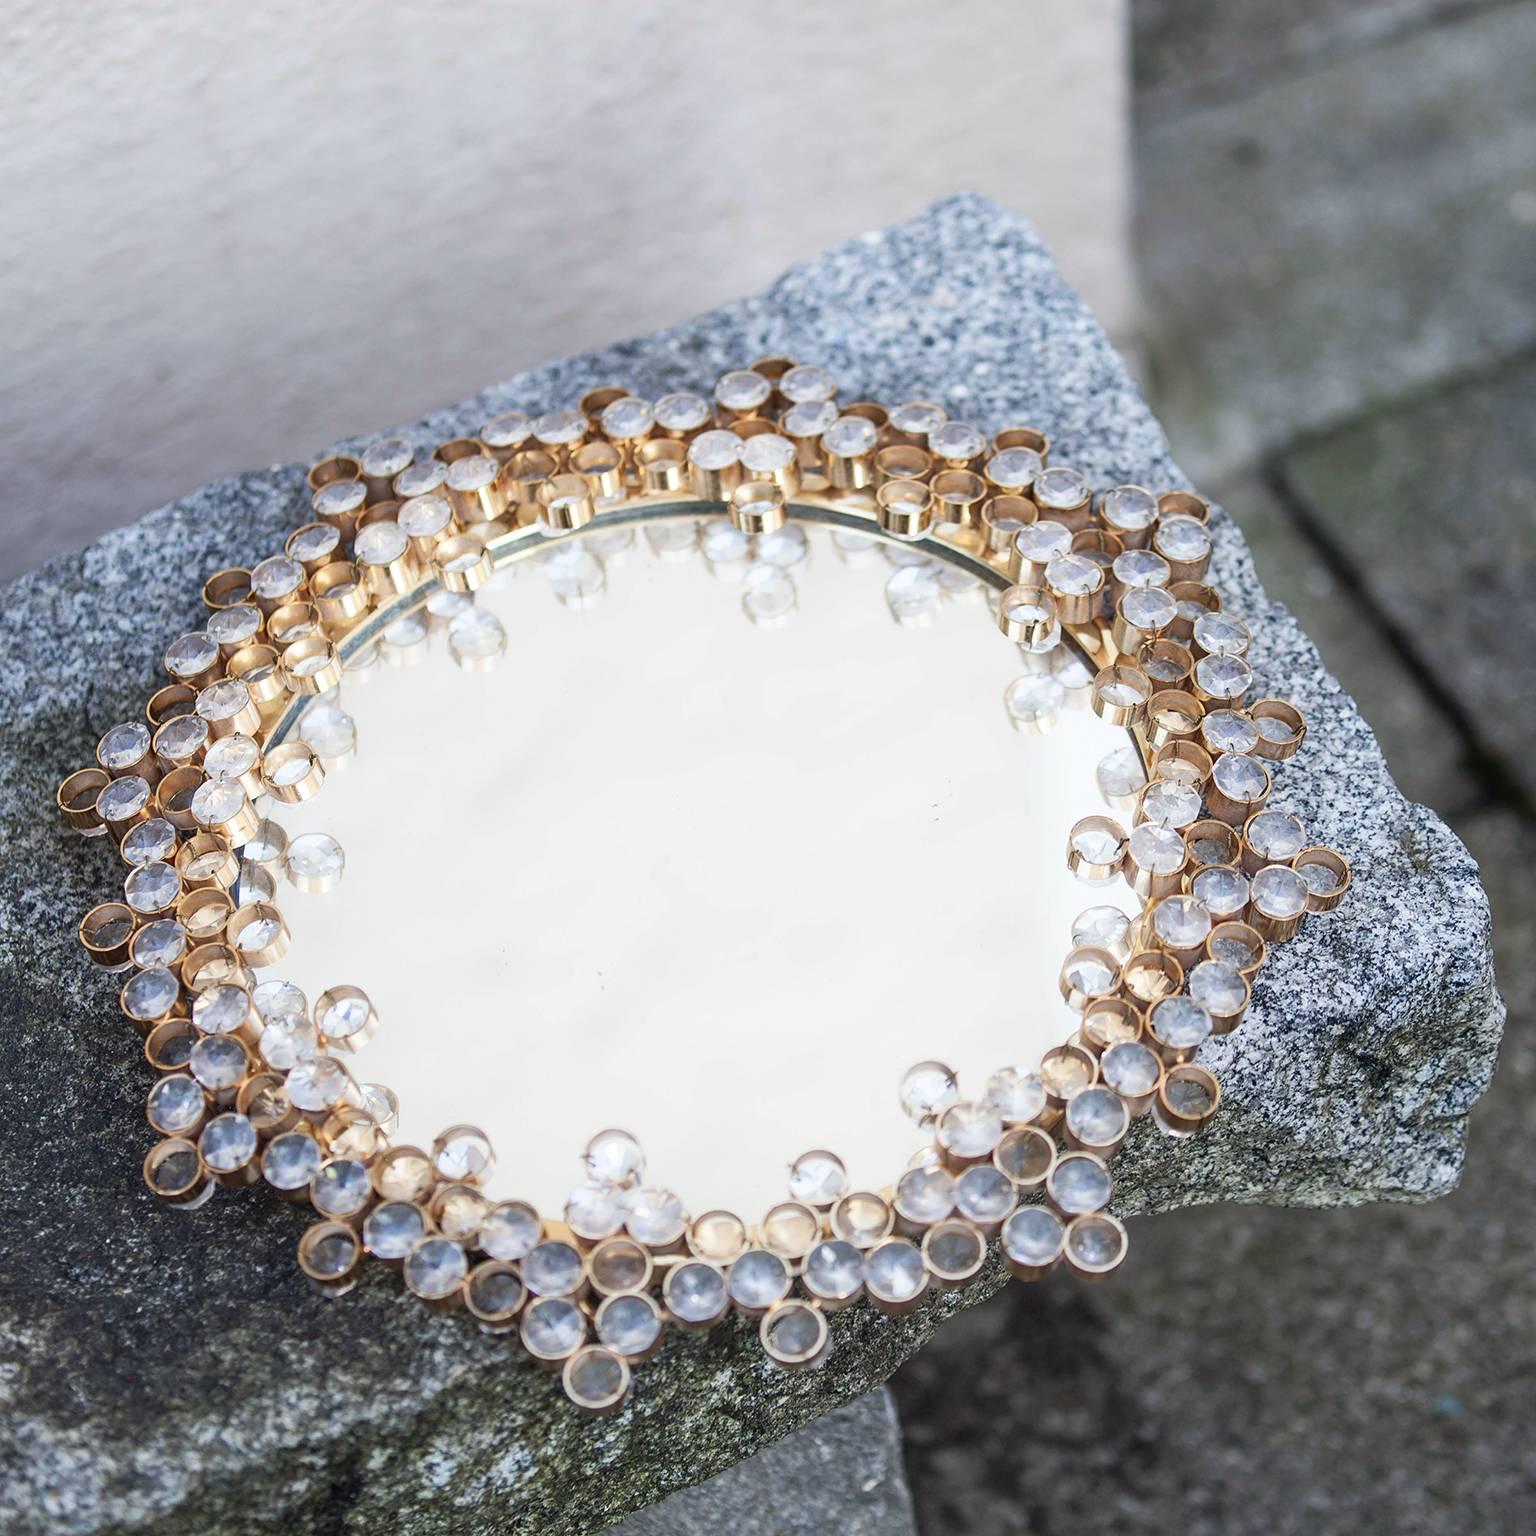 Round mirror surrounded in crystals and gold, Austria, 1965. Gold plate, Swarovski crystals, clear mirror.